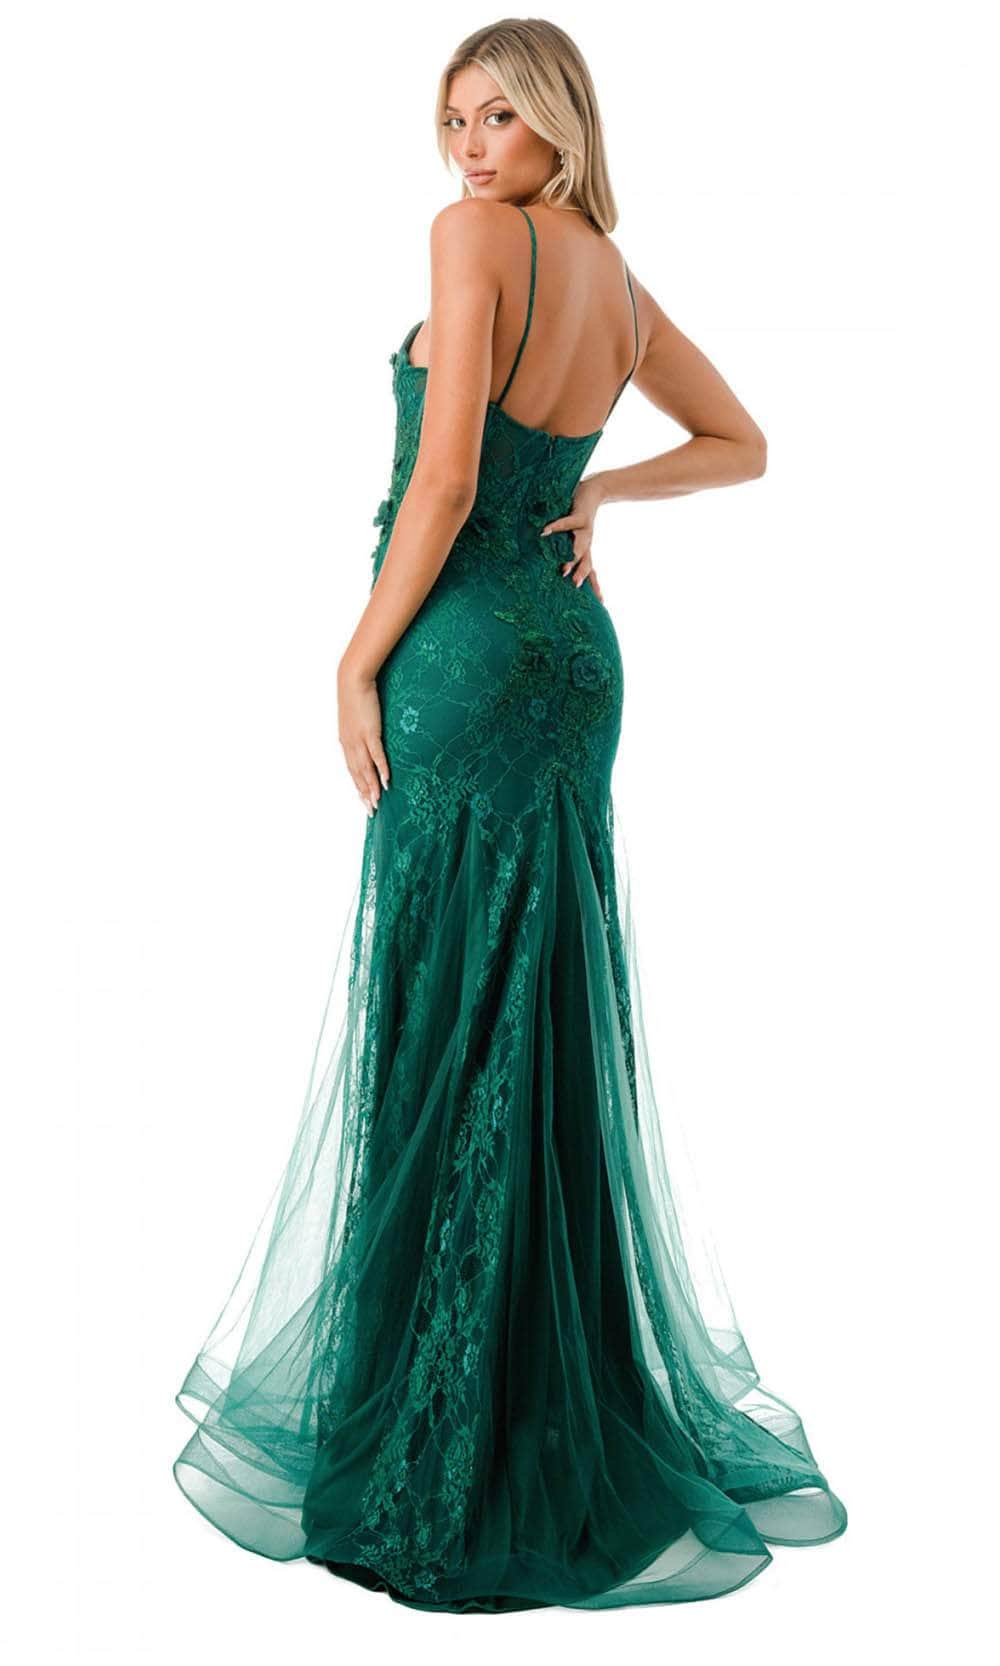 Aspeed Design P2120 - Bustier Bodice Prom Gown